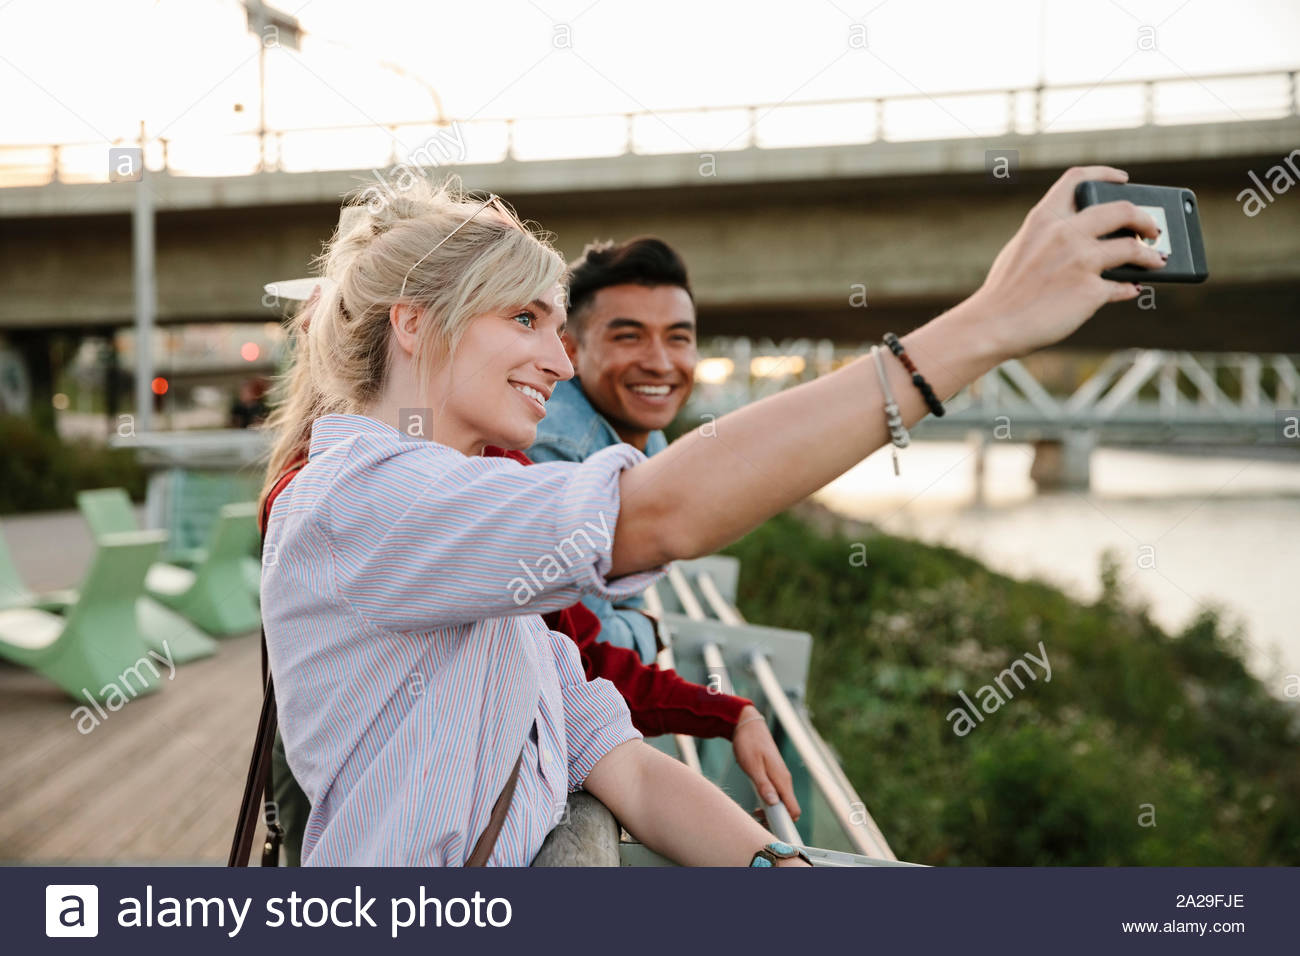 Happy young couple taking selfie with camera phone on urban boardwalk Stock Photo